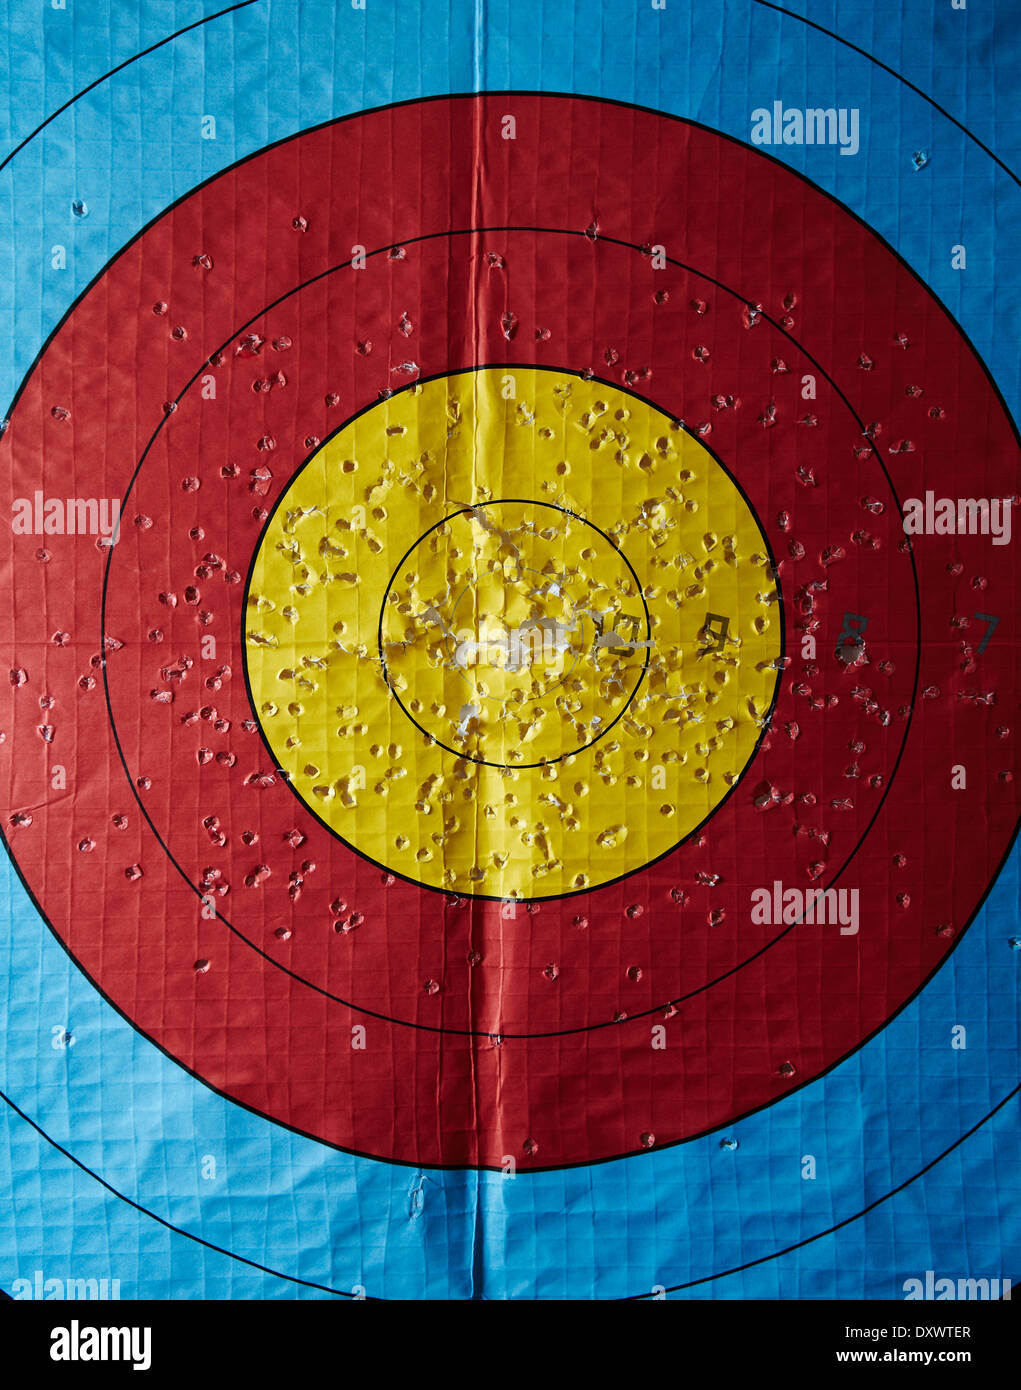 an archery target with lots of holes in it Stock Photo